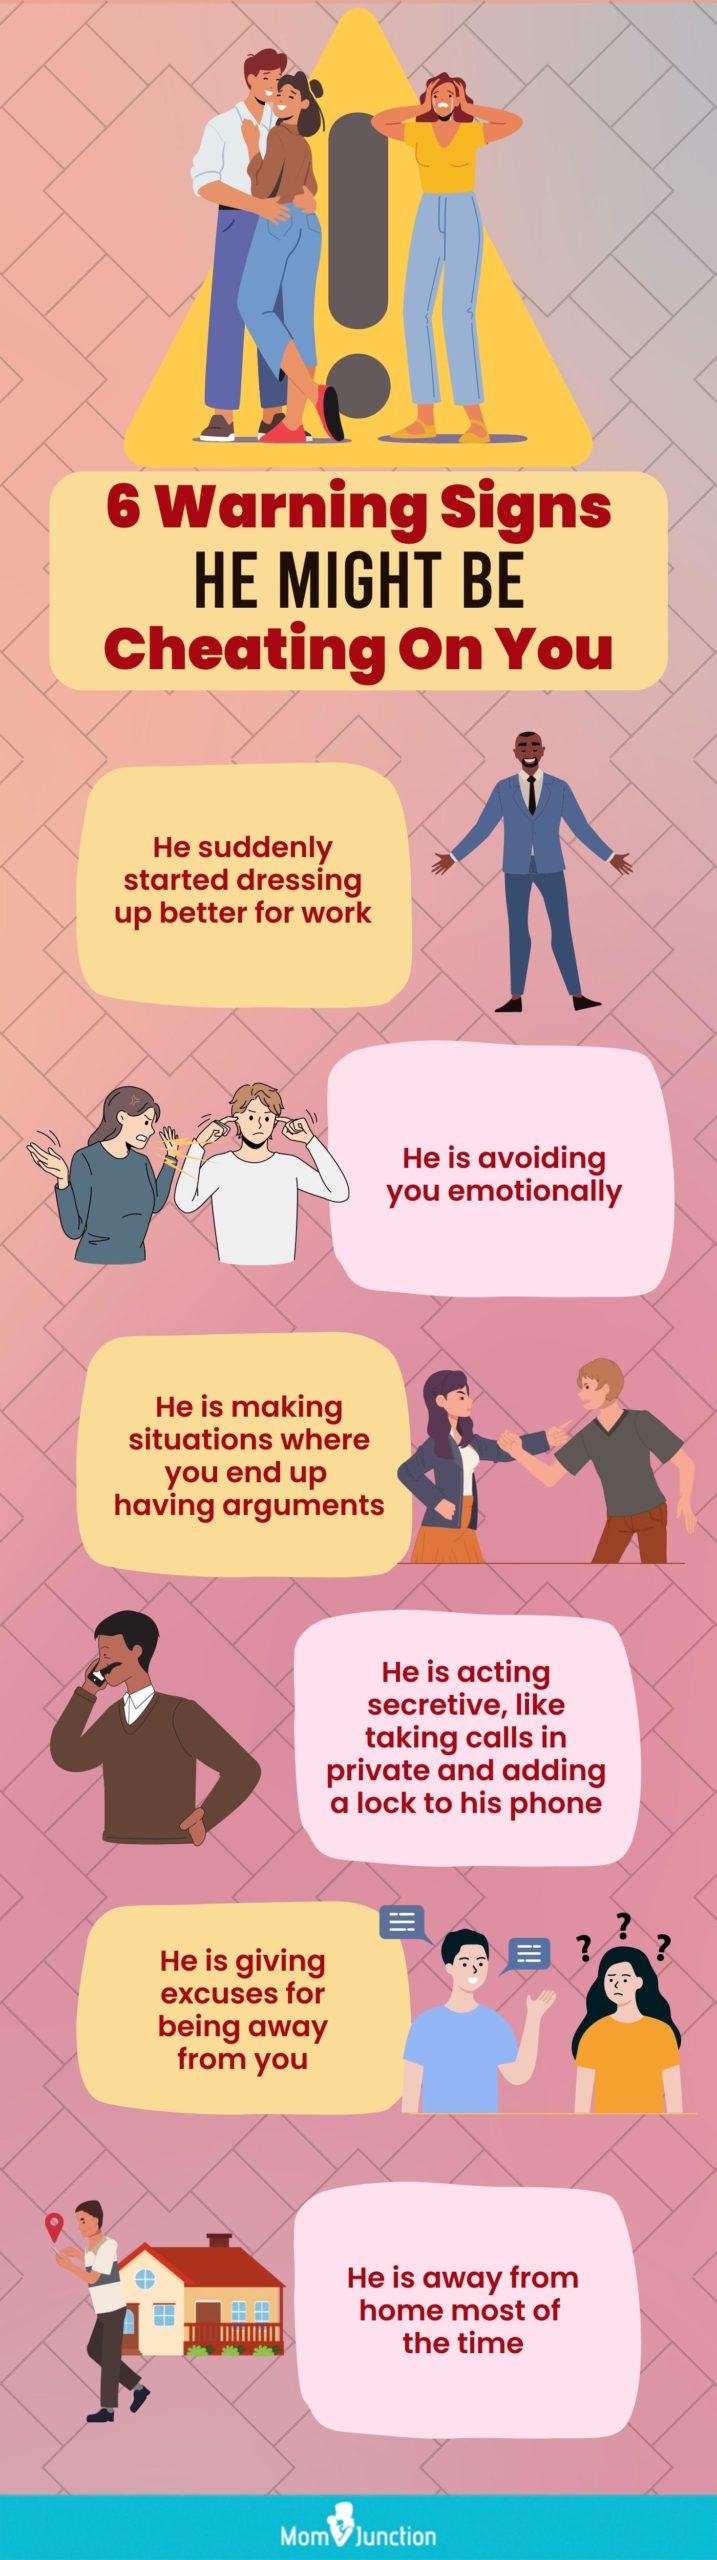 6 warning signs he might be cheating on you (infographic)